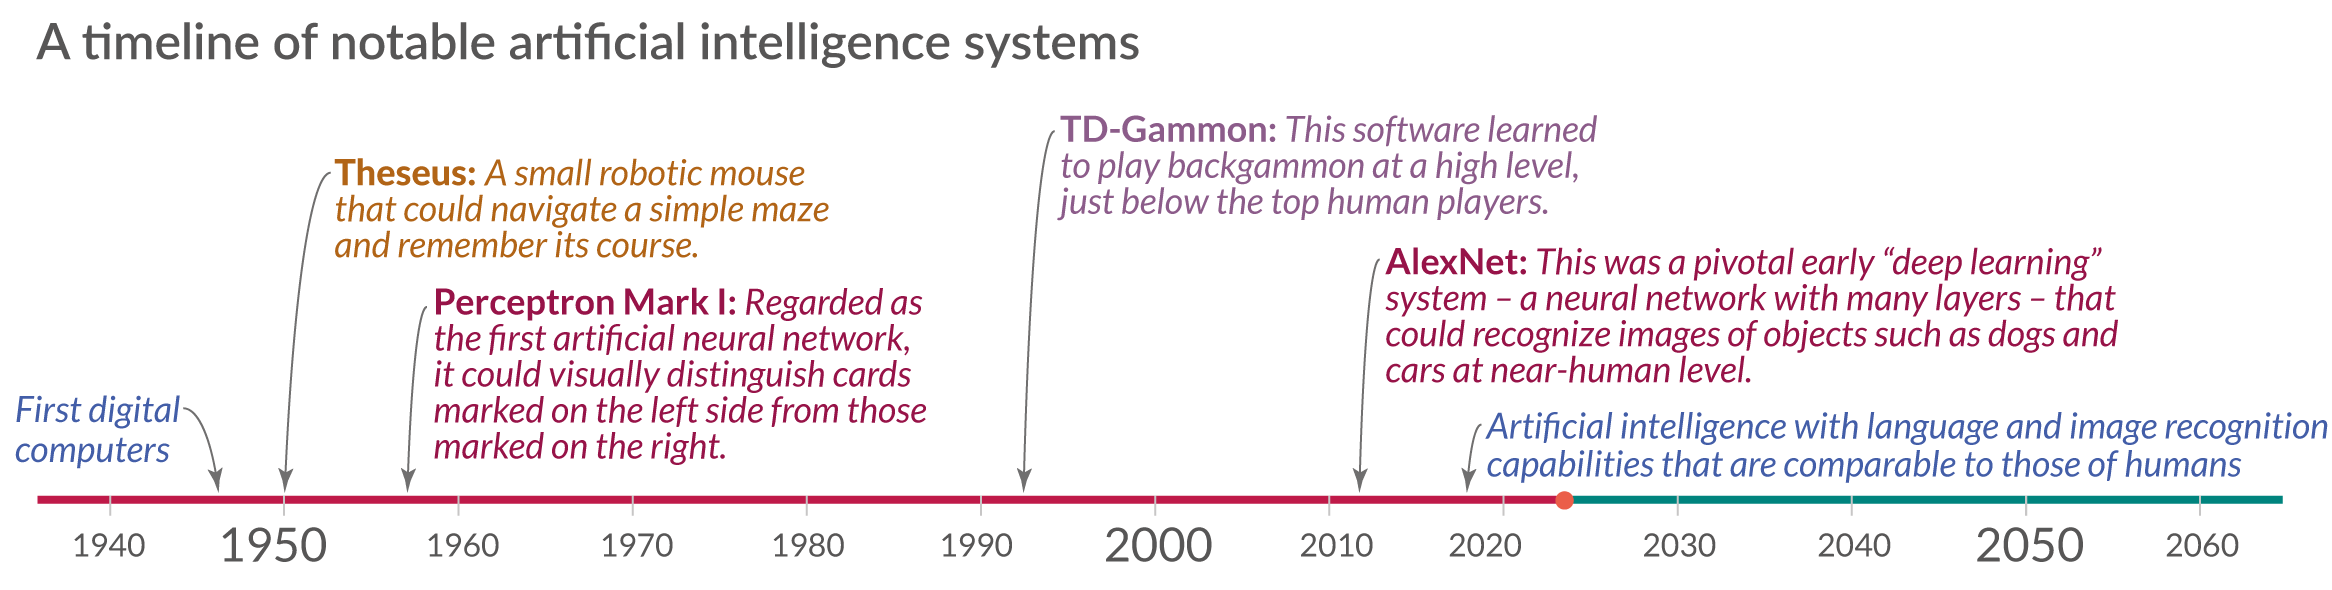 history of artificial intelligence computer timeline